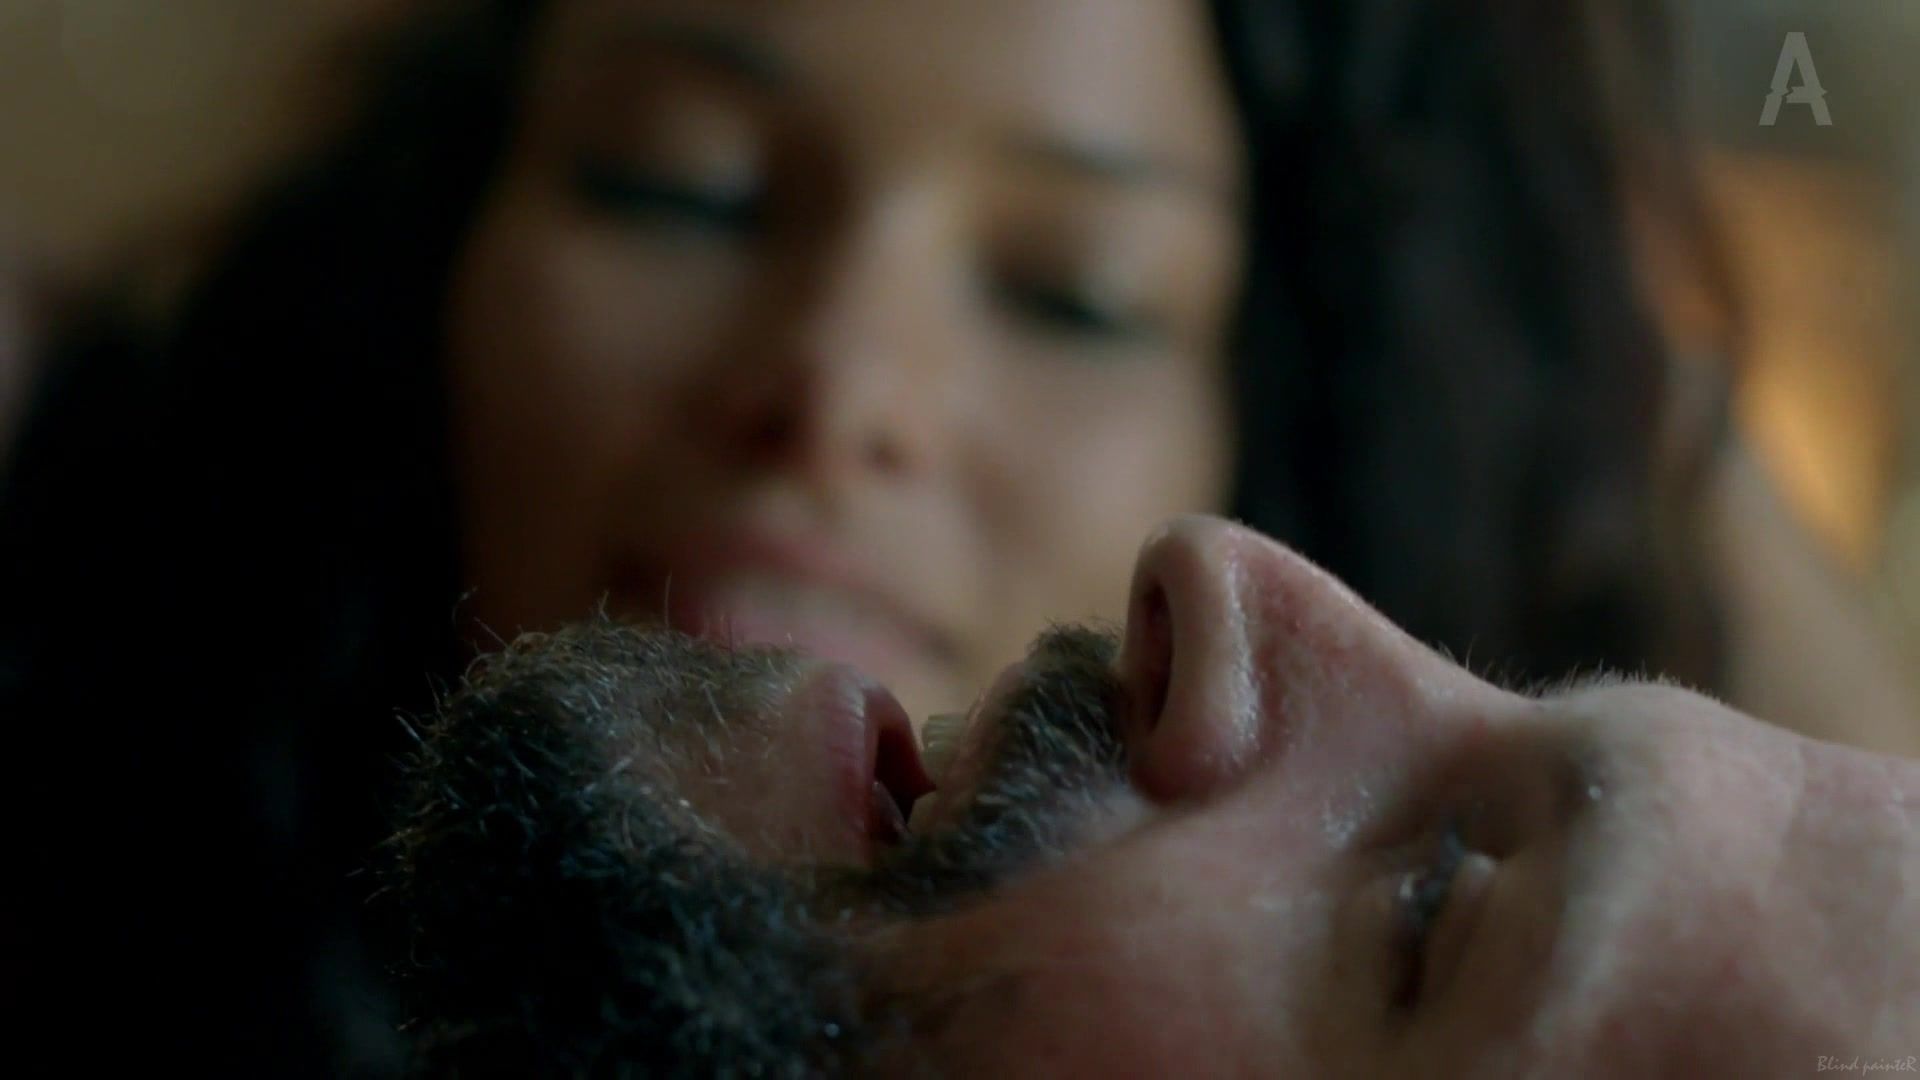 FrenchGFs Sex video Louise Barnes & Jessica Parker Kennedy - Black Sails S01E04 (2014) Tugging